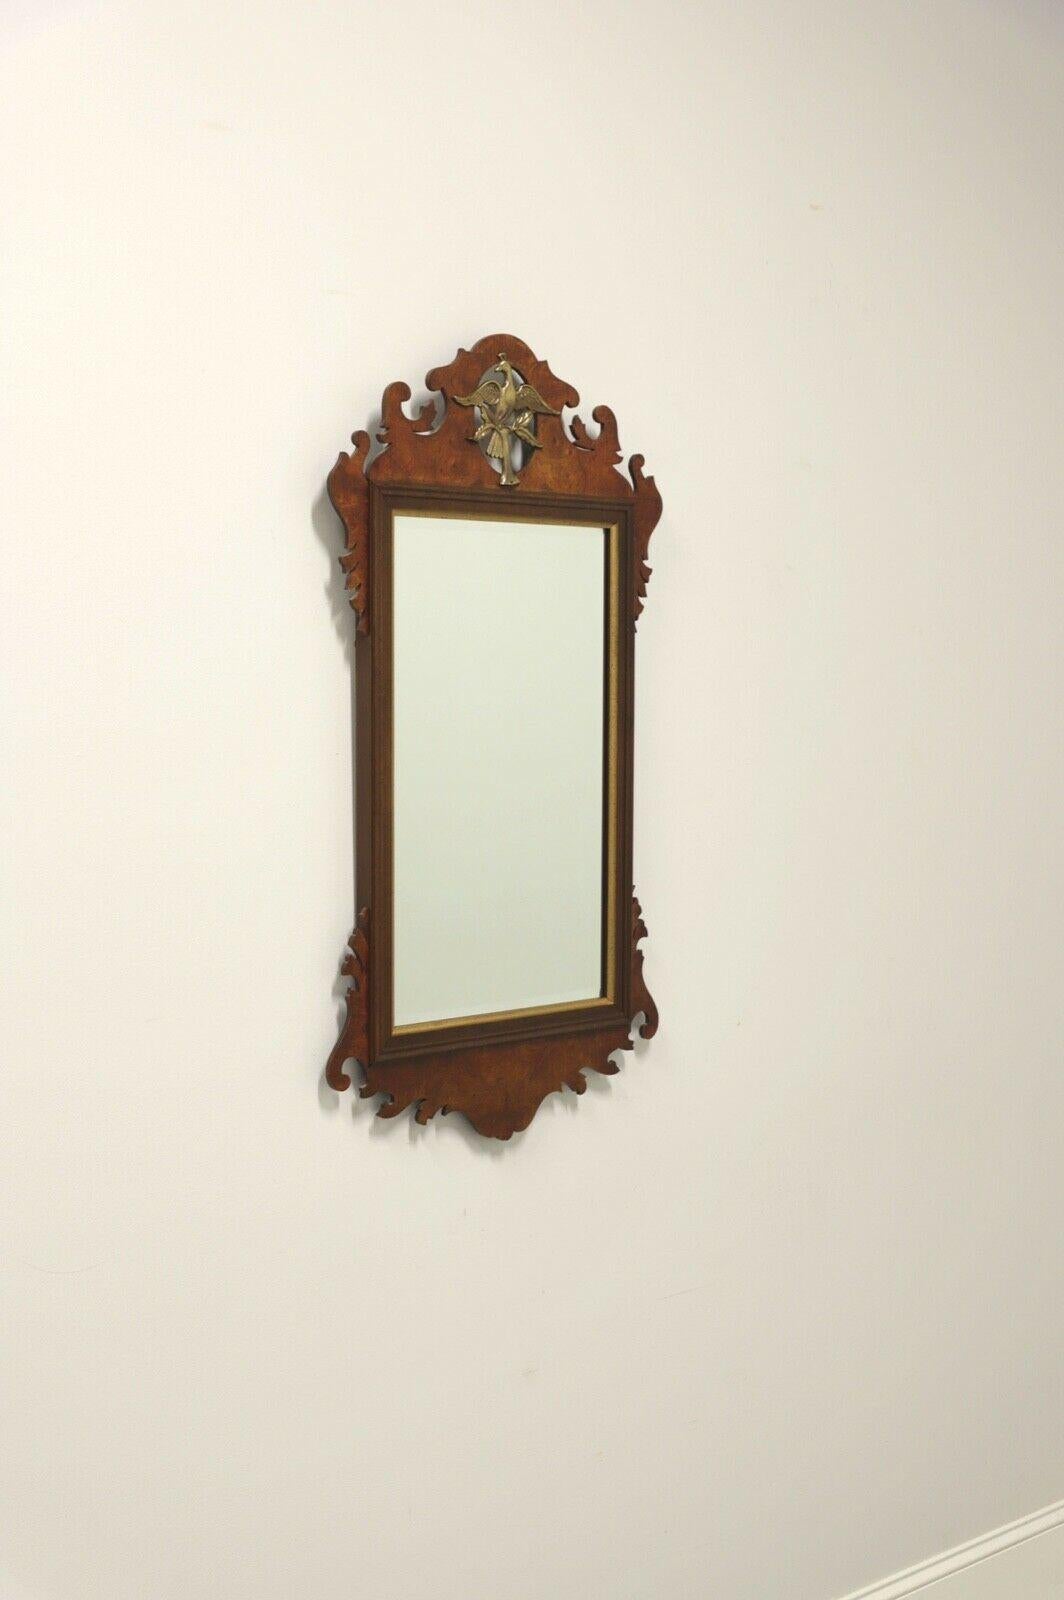 A Chippendale style wall mirror, unbranded, similar quality to quality to Drexel or Henkel Harris. Mirror glass, burl walnut frame with decorative carvings and brass bird in a tree branch to top. Made in the USA, in the late 20th century.

Measures: